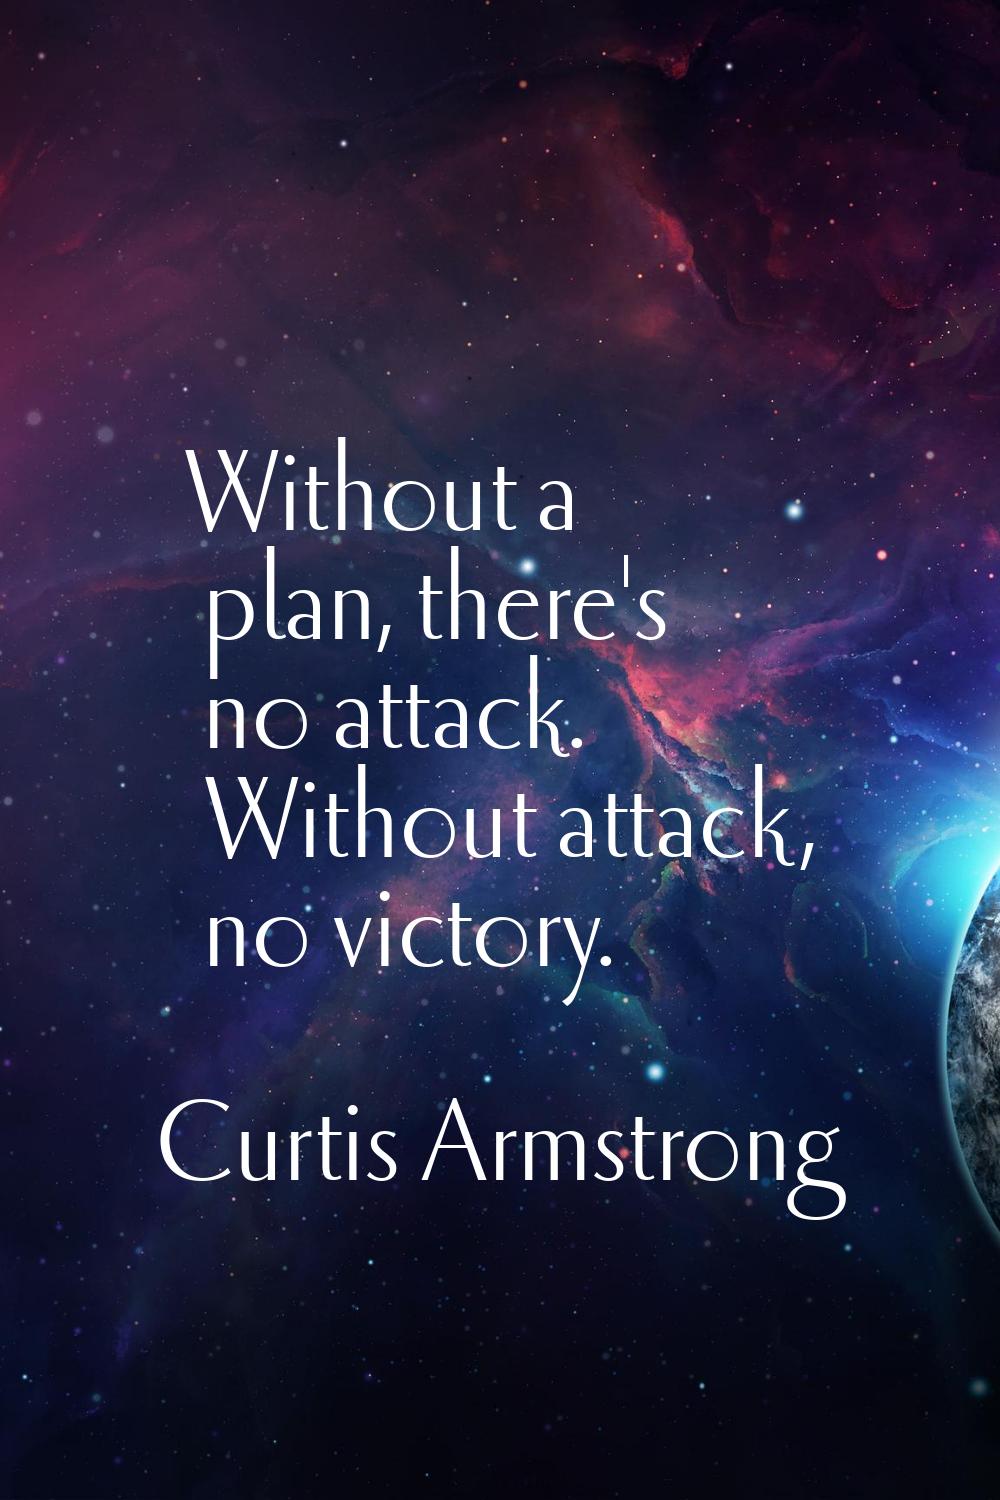 Without a plan, there's no attack. Without attack, no victory.